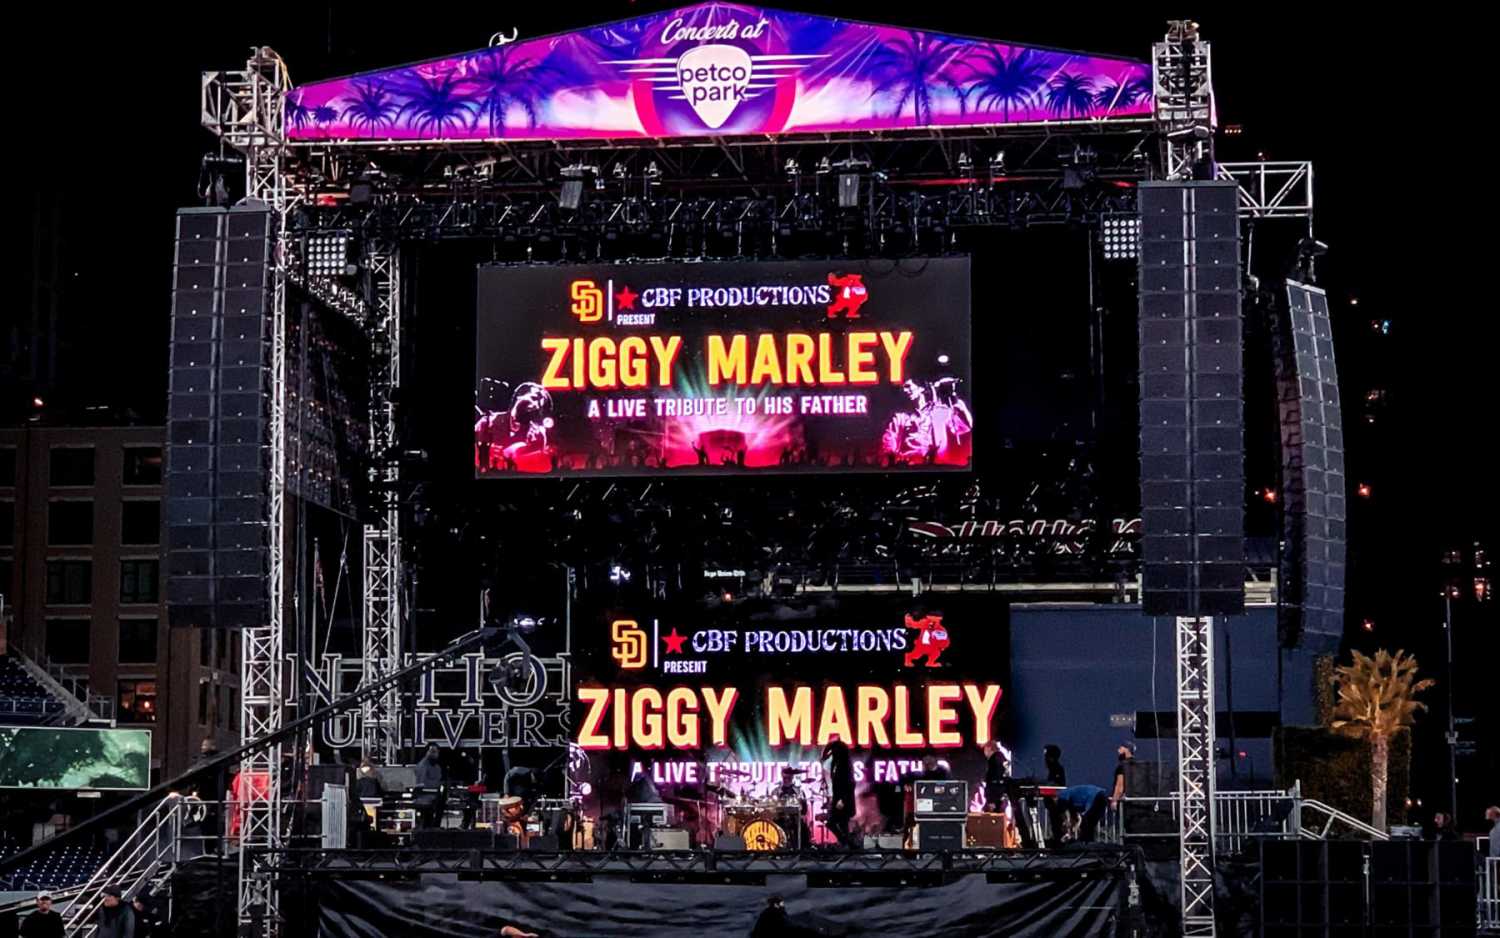 This was Ziggy Marley’s first live concert since the pandemic began